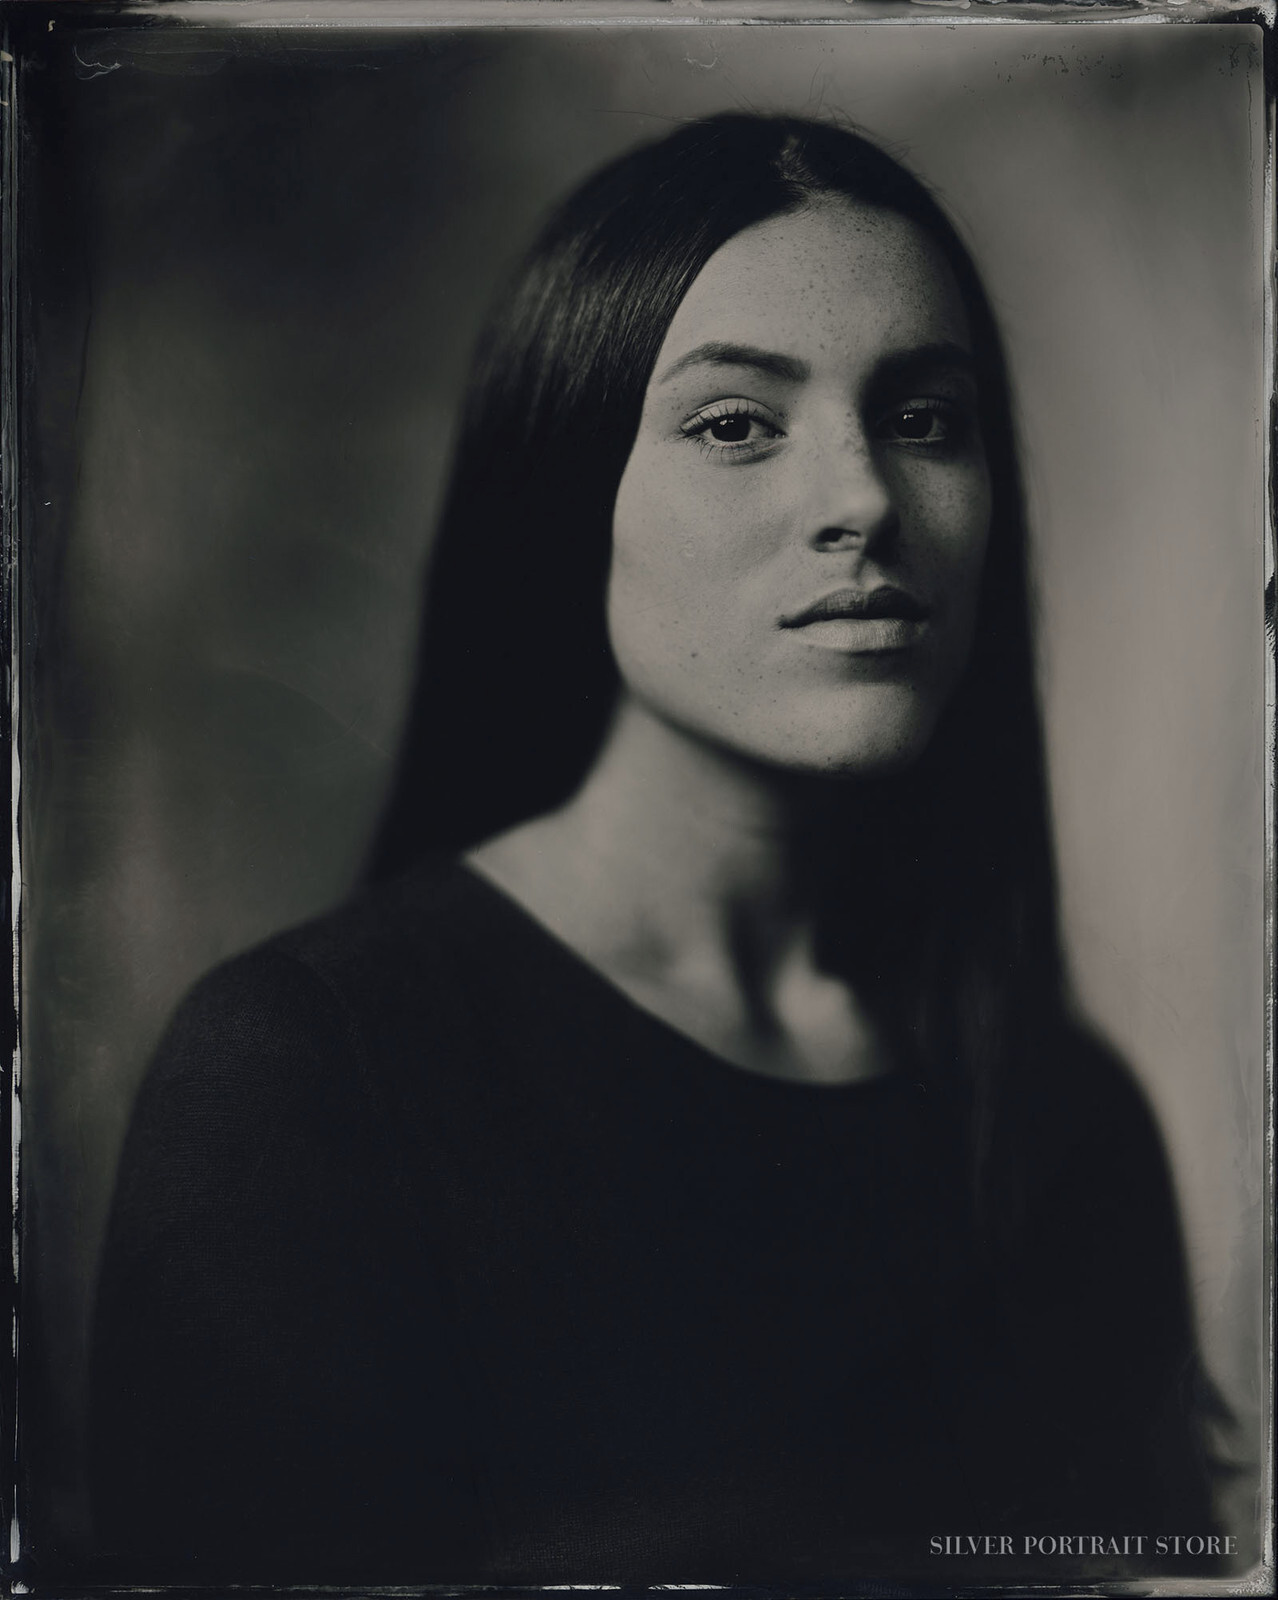 Kiki-Silver Portrait Store-scan from Wet plate collodion-Tintype 20 x 25 cm.